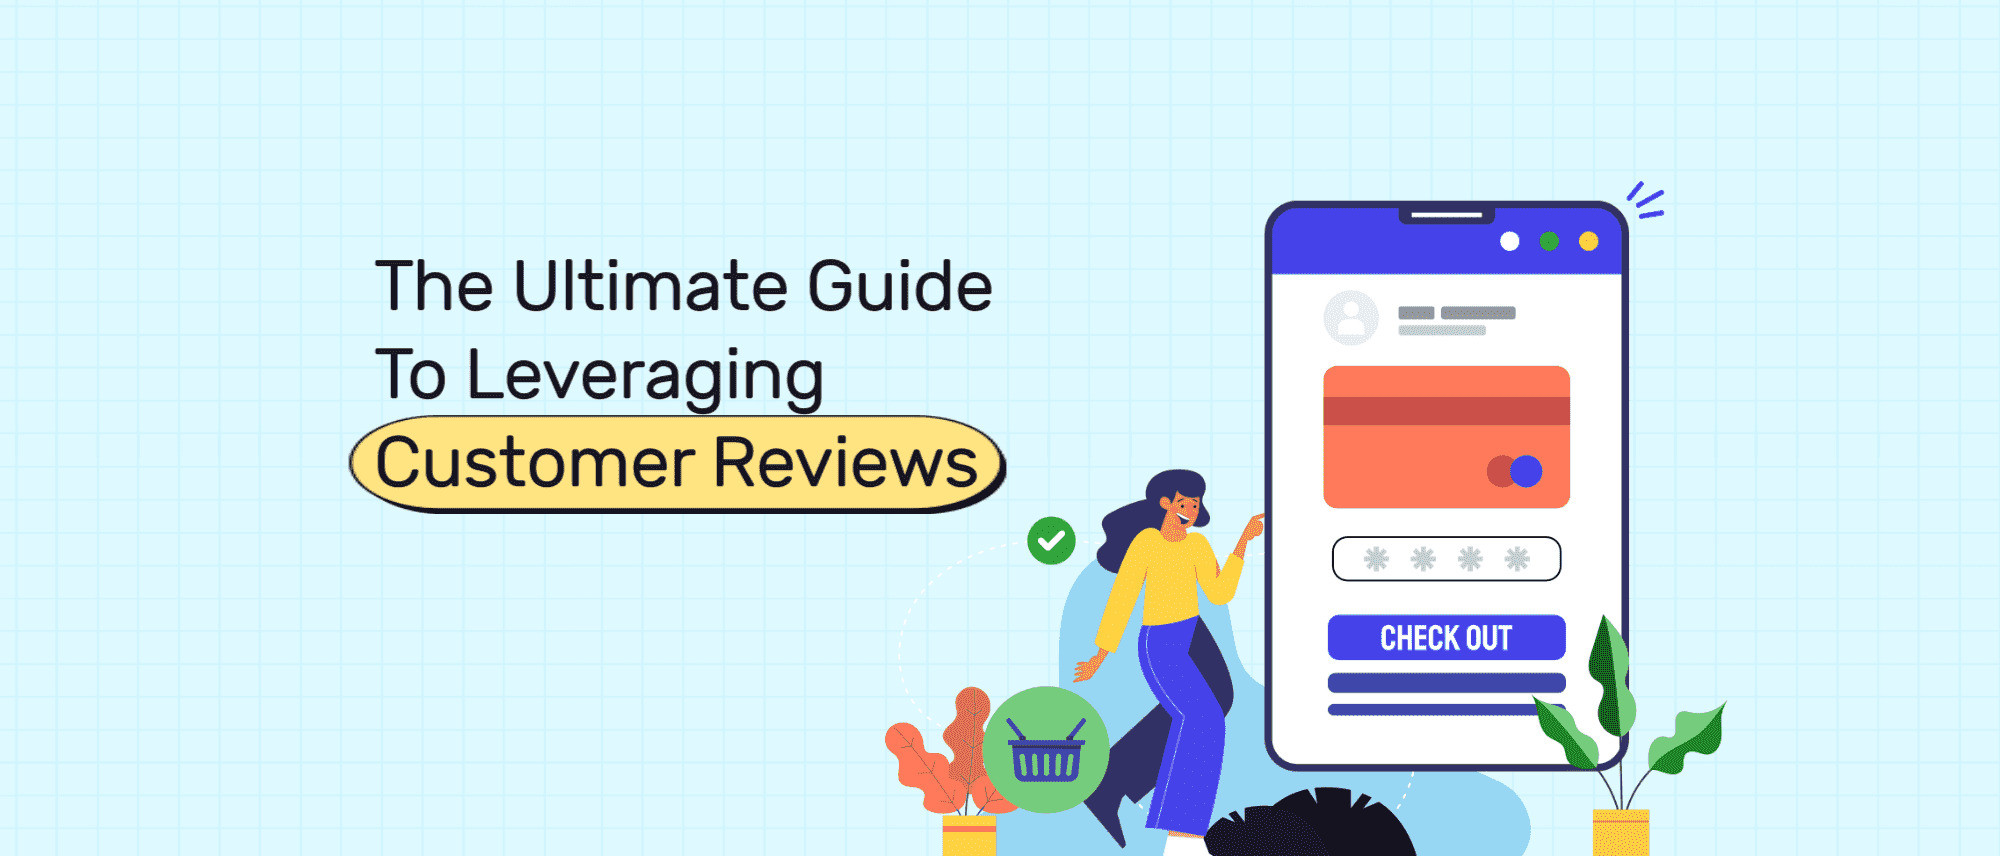 the-ultimate-guide-to-leveraging-customer-reviews-for-your-dtc-brands-meteoric-growth